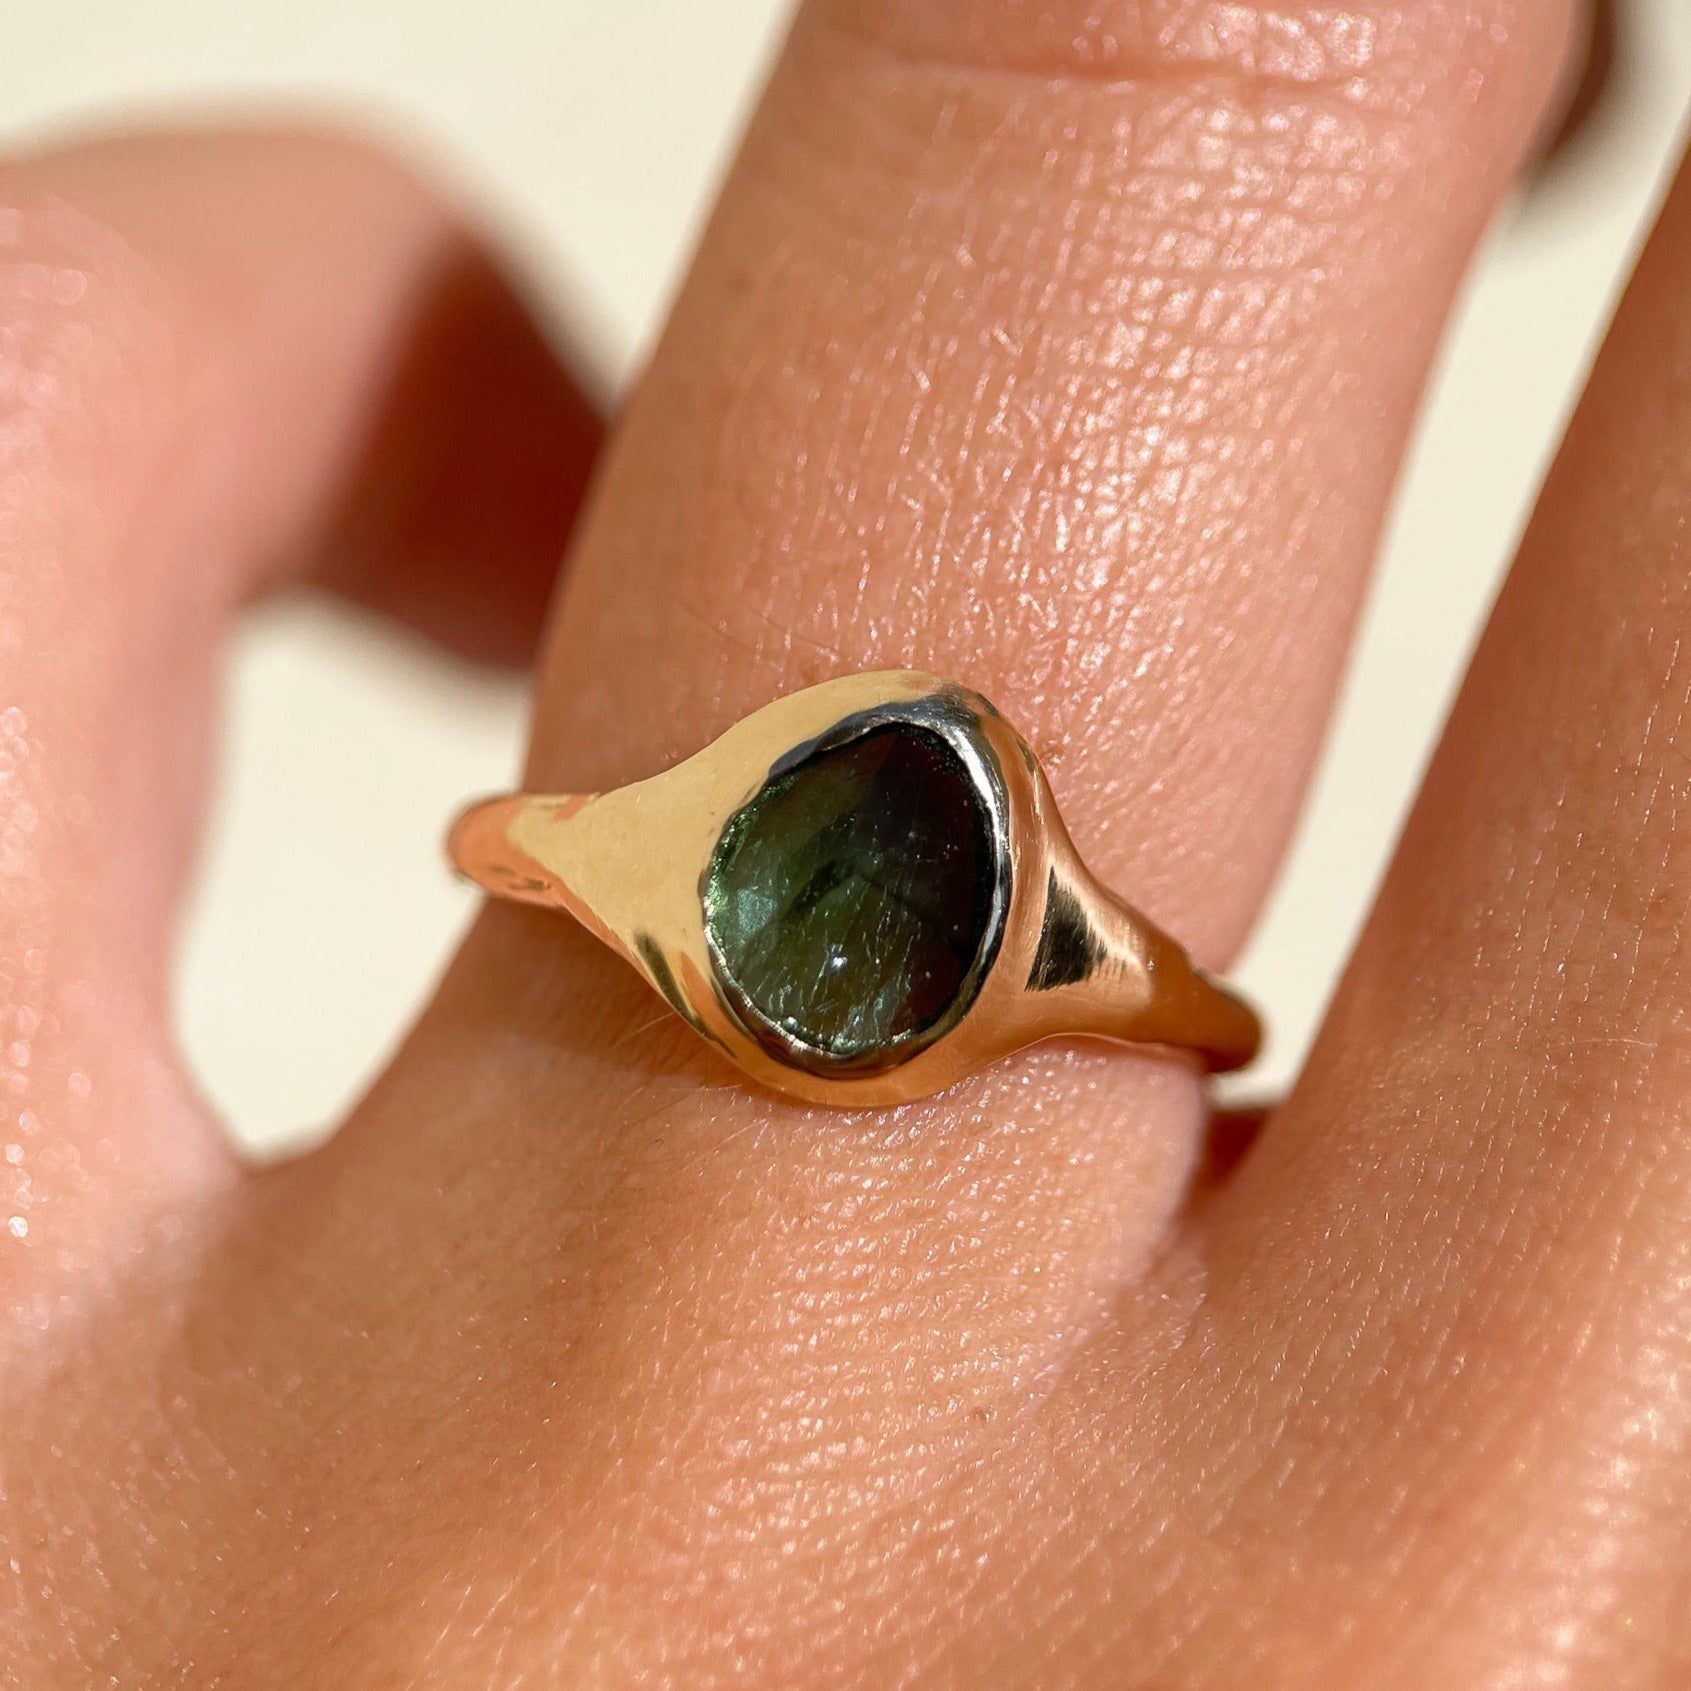 A rose cut blue green tourmaline is set in 14k  gold  into a signet style ring, worn on the ring finger.